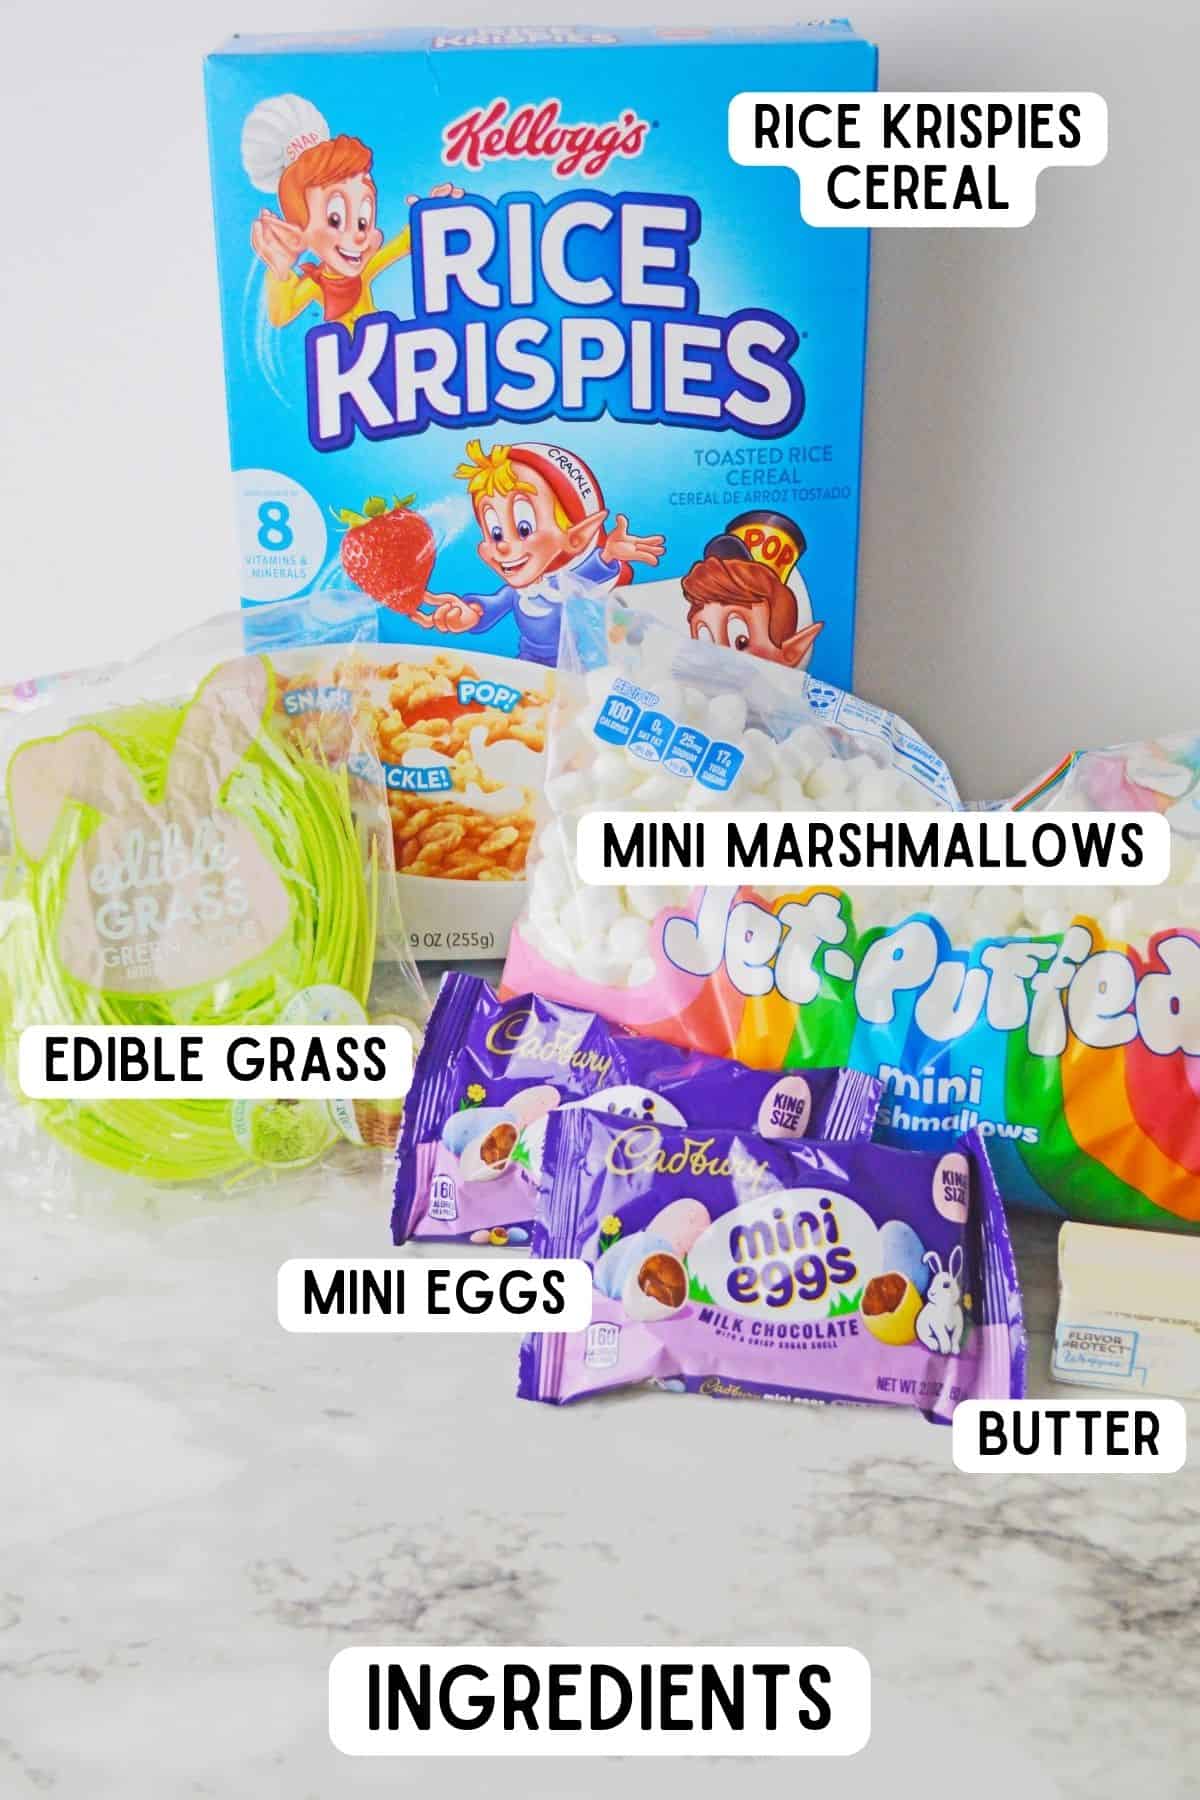 Ingredients on countertop: Box of Rice Krispies cereal, bag of jet-puffed mini marshmallows, butter, 2 small bags of Cadbury mini eggs, and a bag of green apple flavored edible grass.